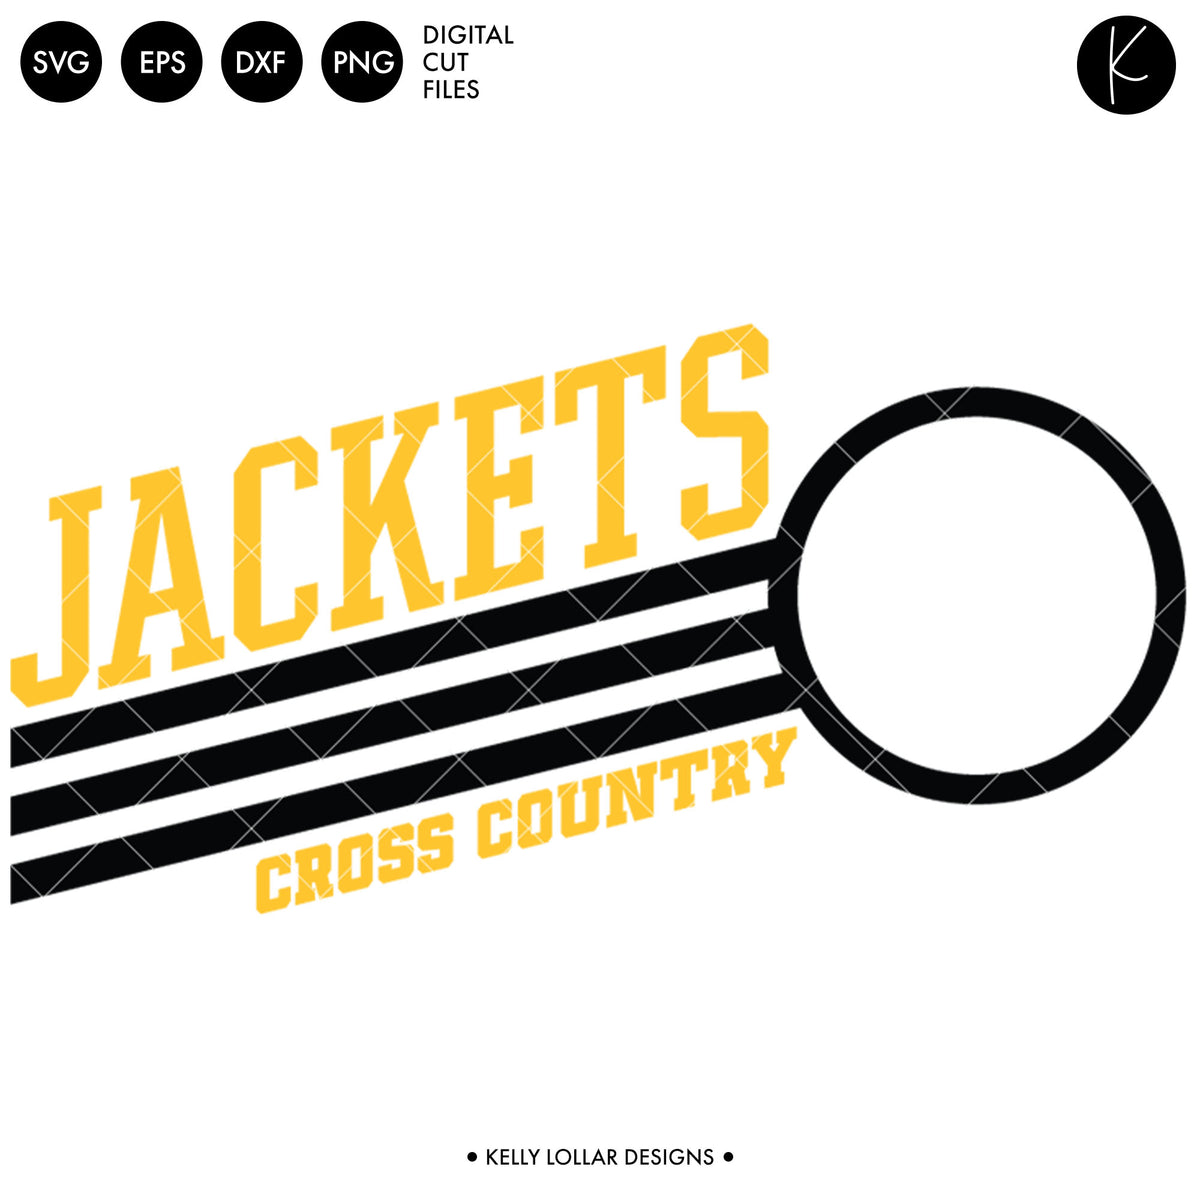 Jackets Cross Country Bundle | SVG DXF EPS PNG Cut Files